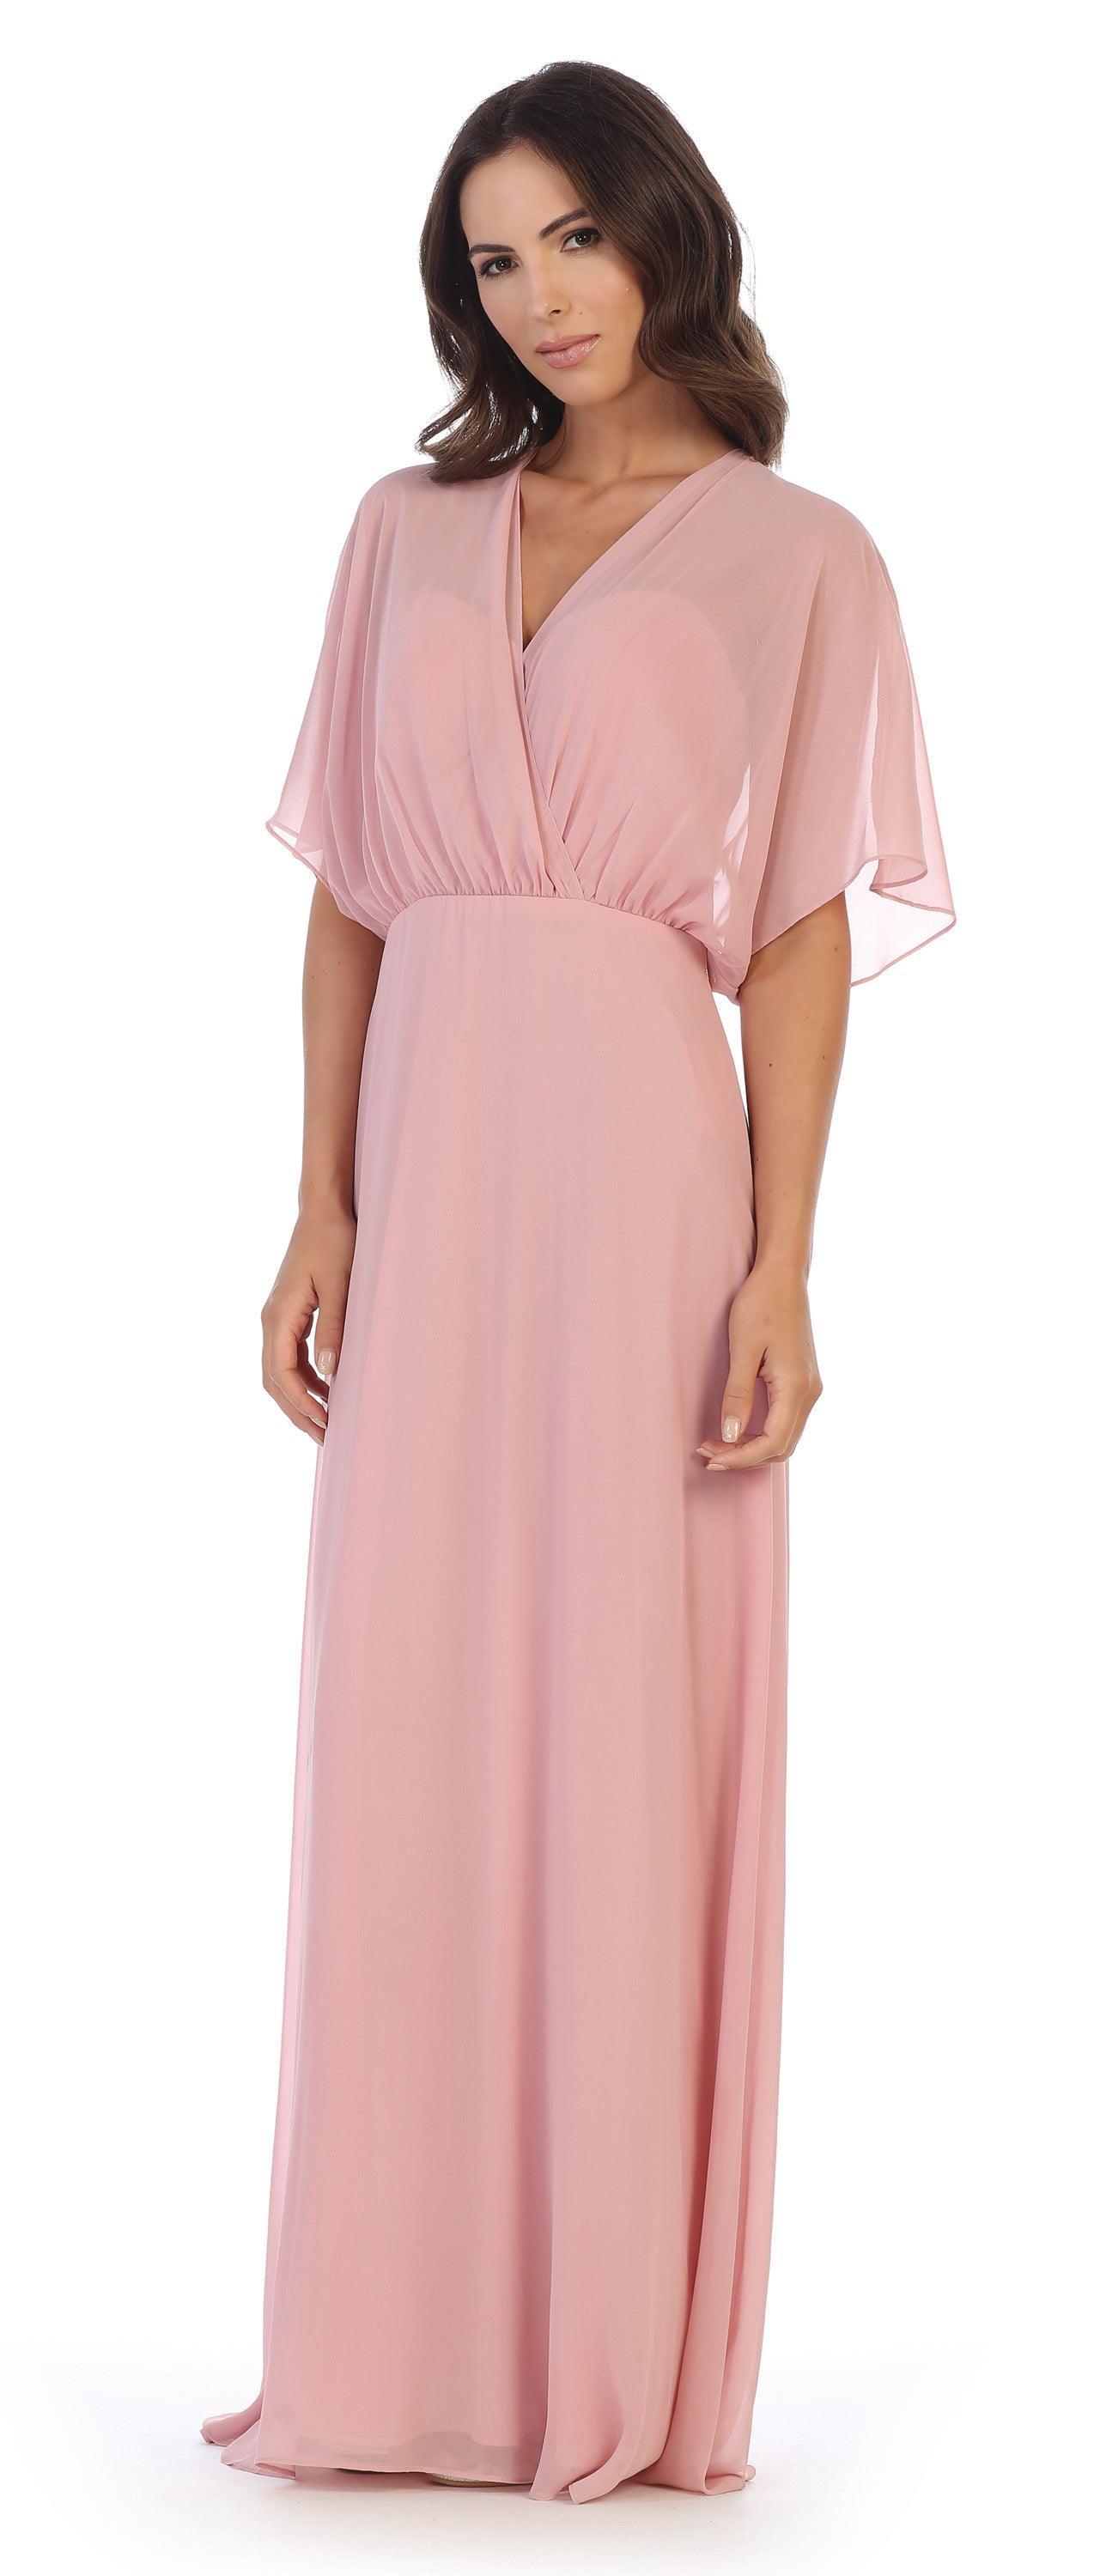 Formal Mother of the Bride Draped Chiffon Gown Sale - The Dress Outlet